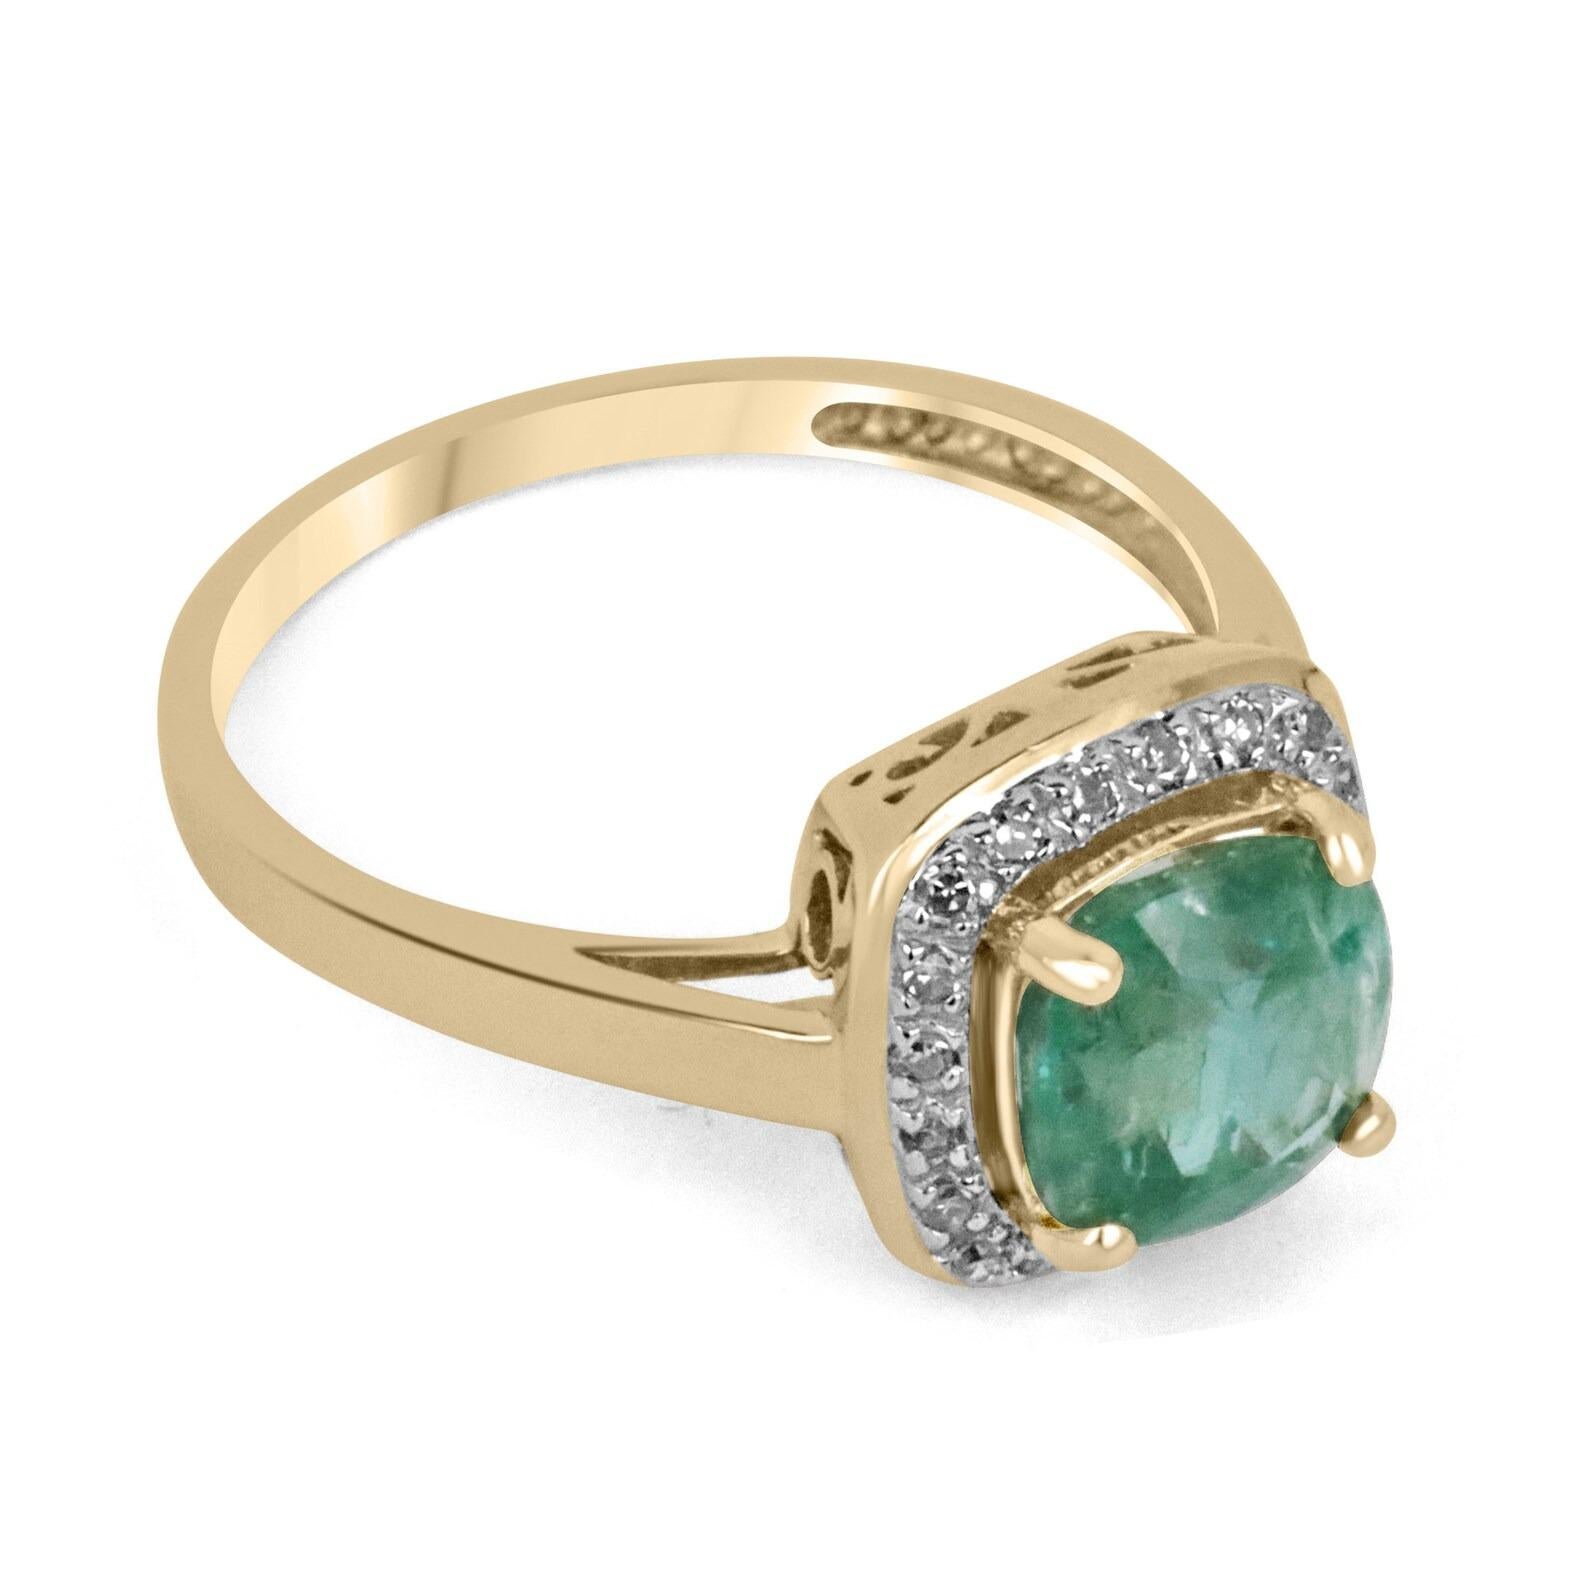 A stunning emerald and diamond right-hand/engagement ring. The center stone features a gorgeous 2.66-carat, natural earth-mined cushion cut emerald from the origin of Zambia. This gemstone displays a warm bluish-green color, with good clarity and